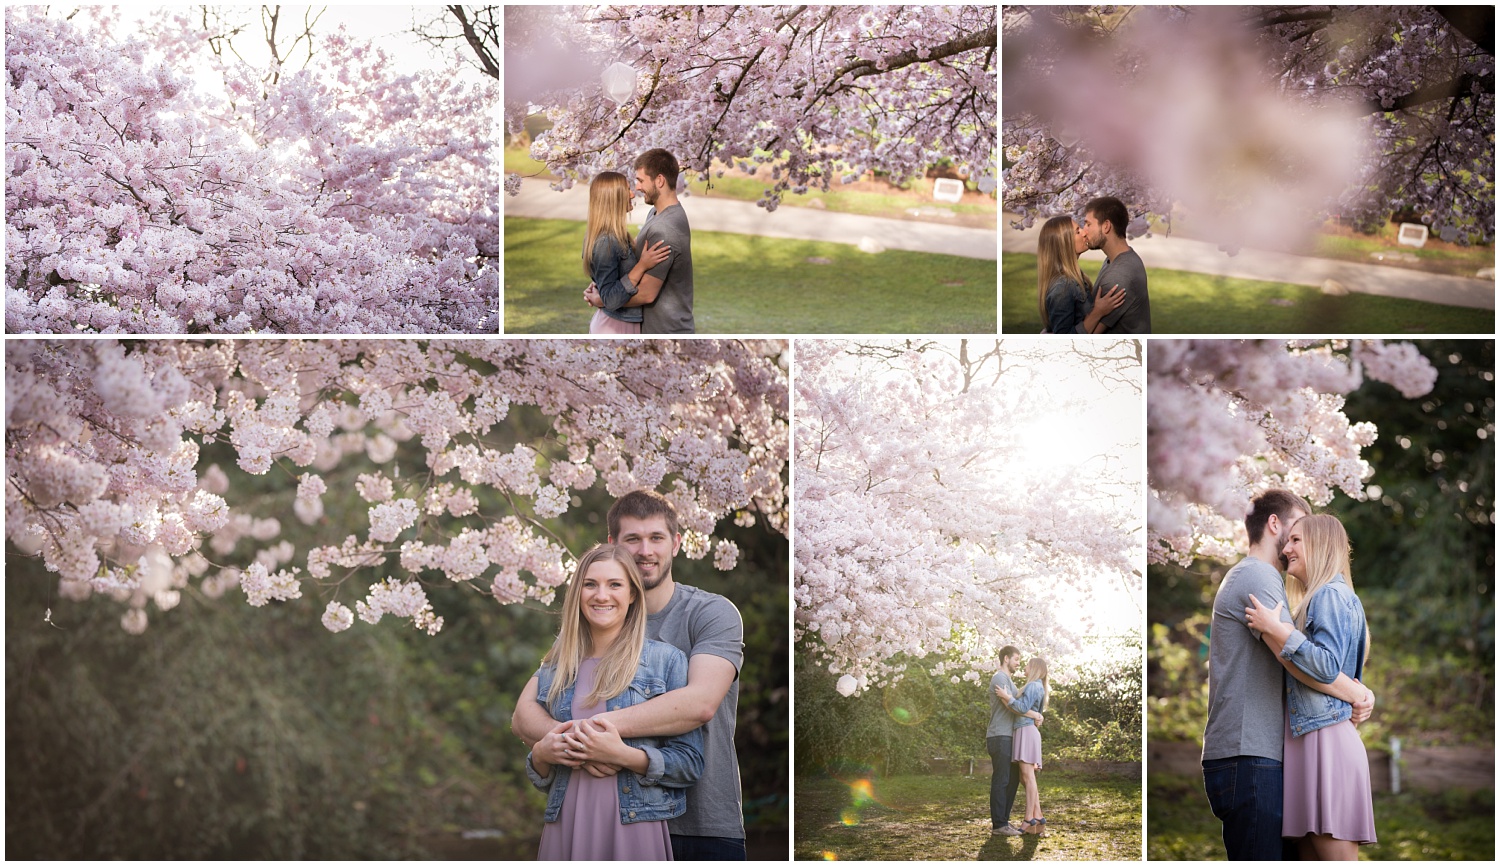 Amazing Day Photography - Cherry Blossom Engagement Session - Queen Elizabeth Park Engagement Session - Vancouver Engagement Photographer  (1).jpg